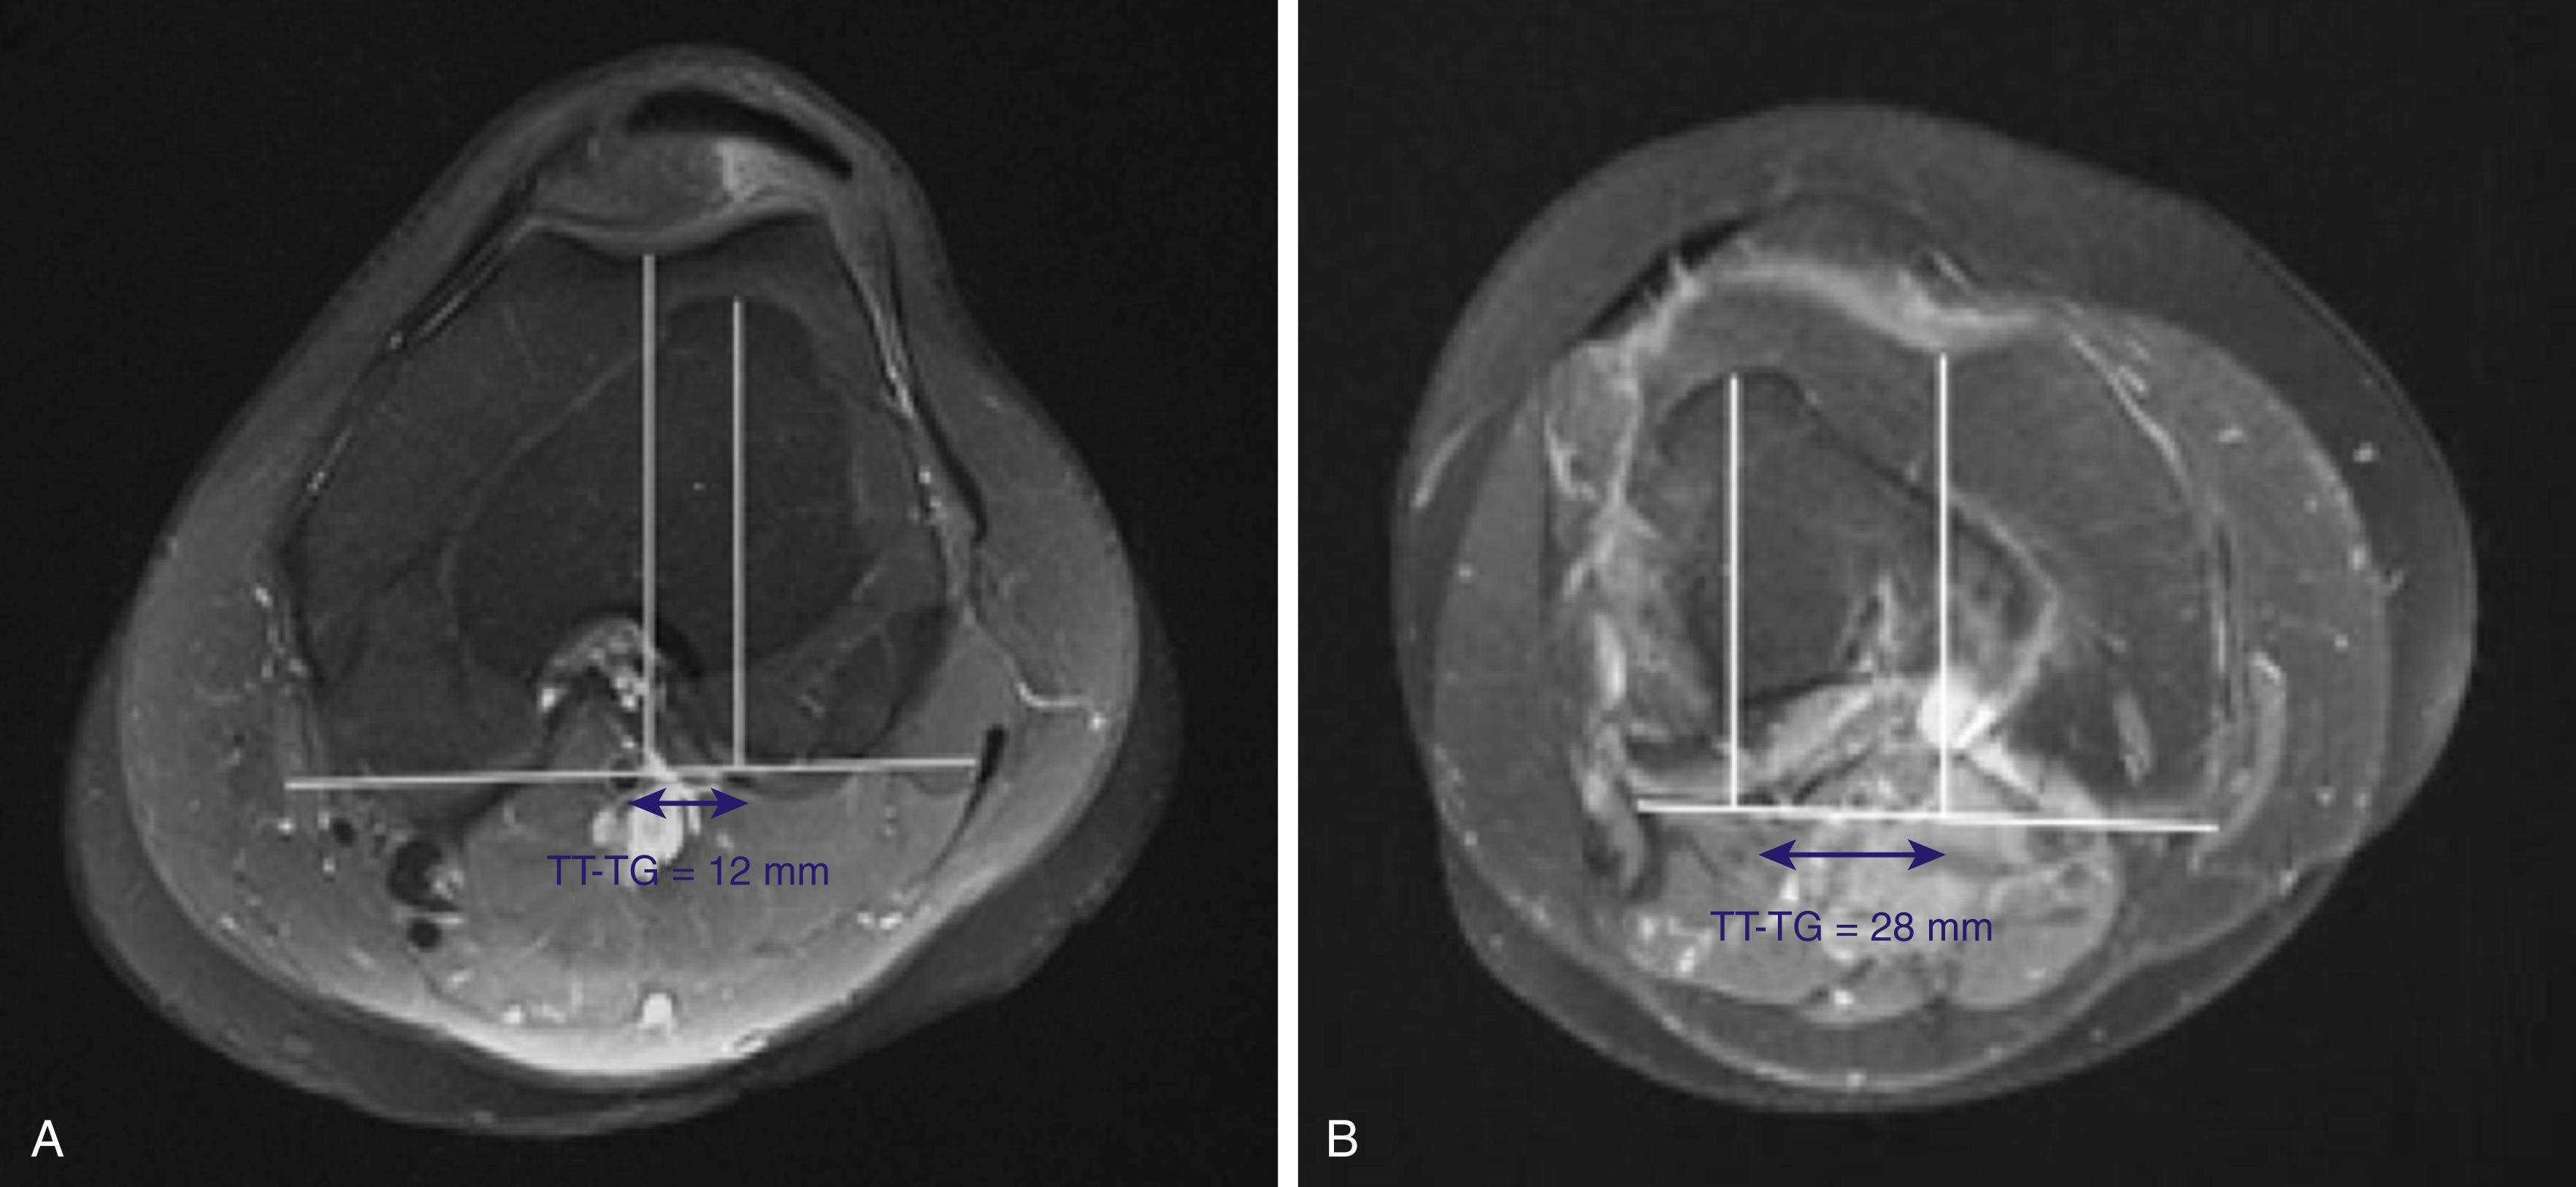 Fig. 30.7, Magnetic resonance imaging (MRI) tibial tubercle–trochlear groove (TT-TG) distance at (A) normal (TT-TG = 12 mm) and (B) abnormal (TT-TG = 28 mm) values on axial T2 MRI.